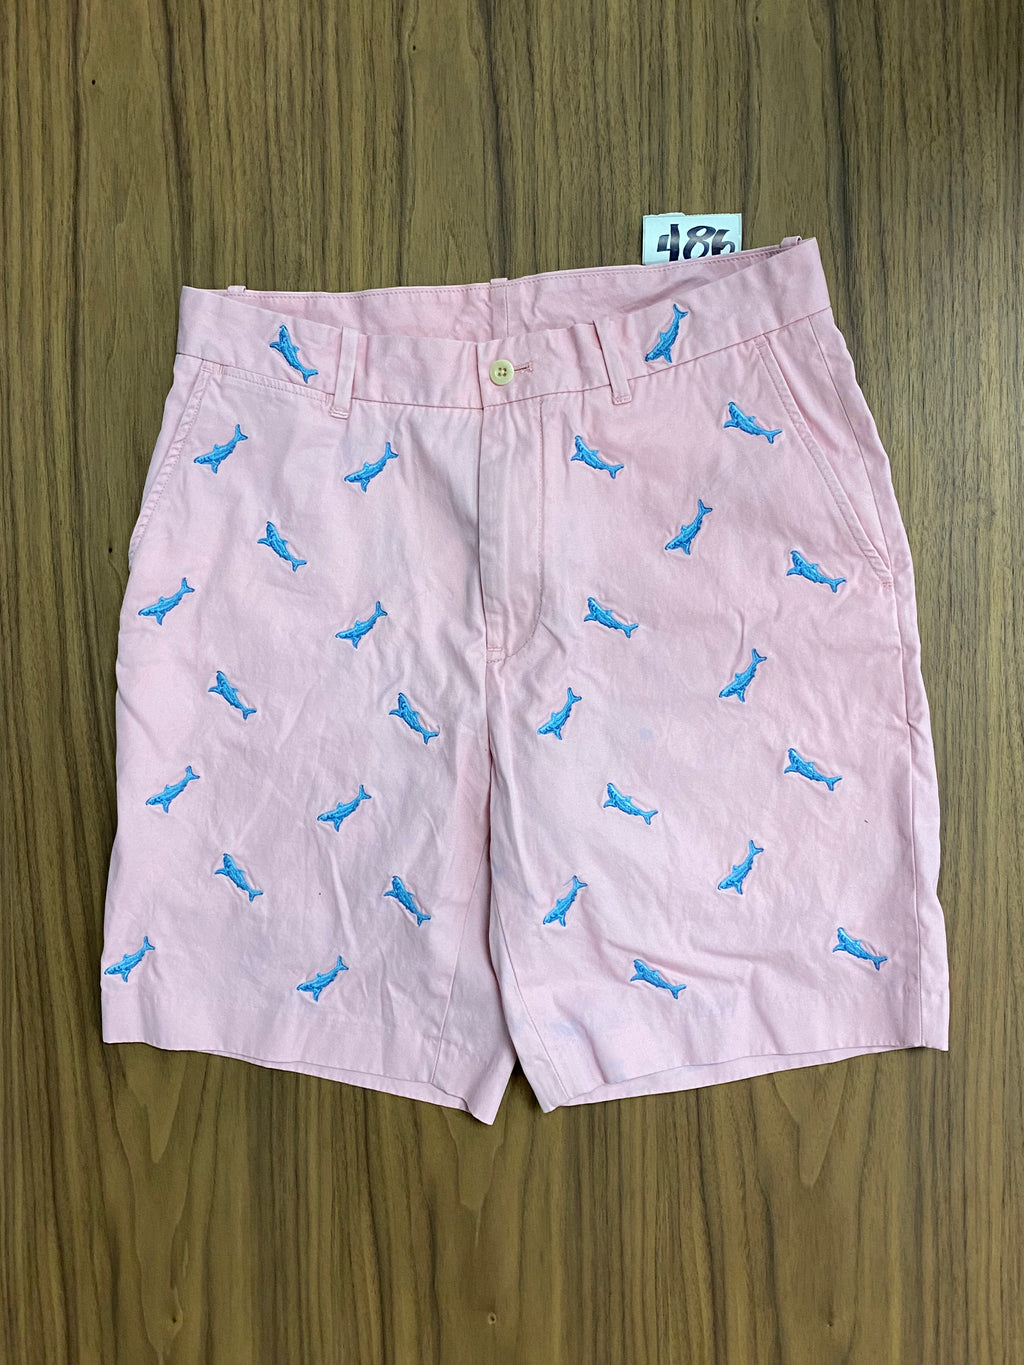 Polo Golf Shark Embroidered Shorts - Pink